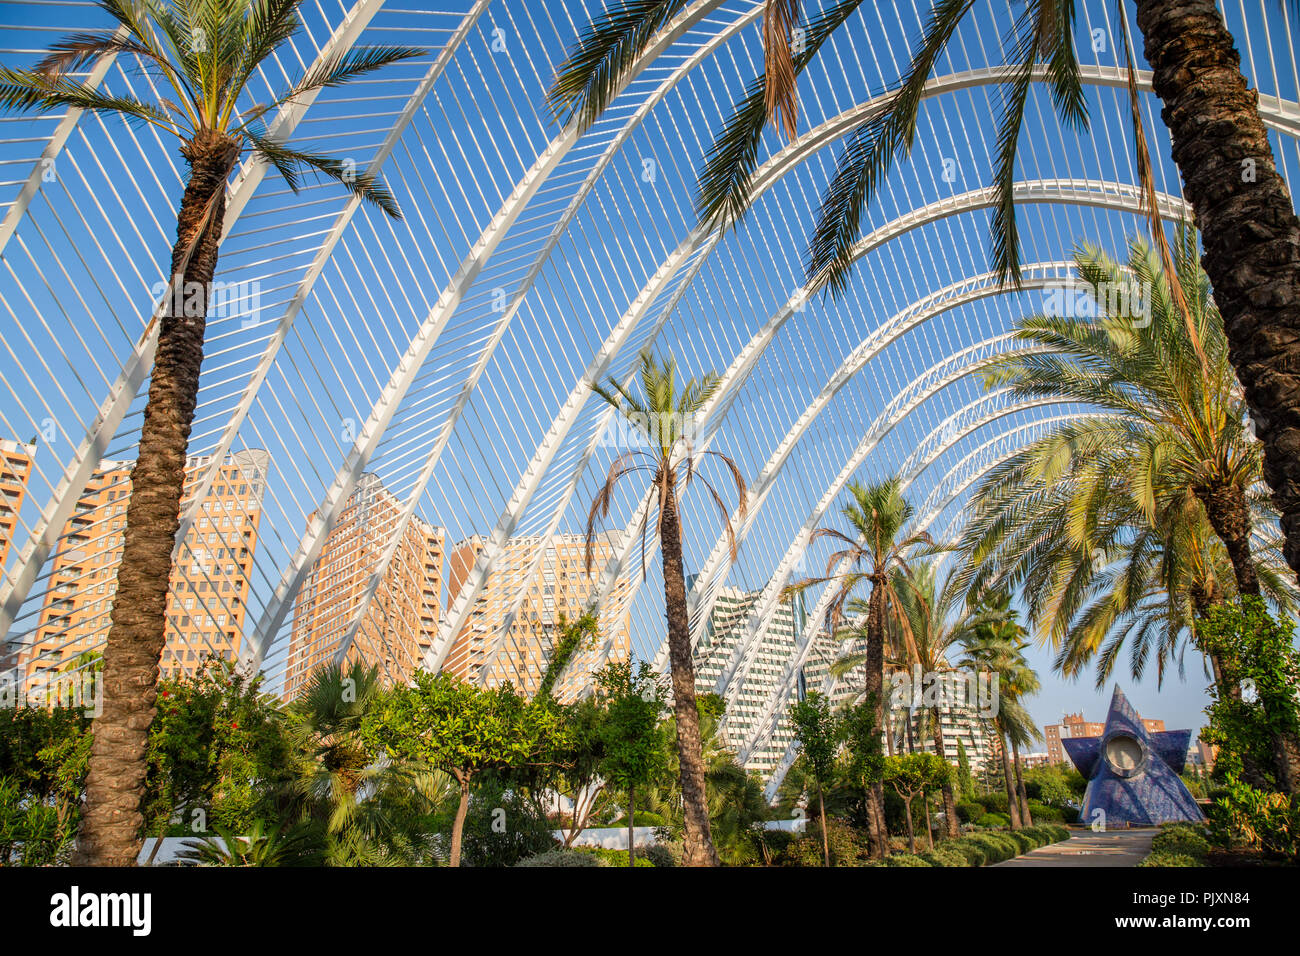 The Umbracle arched structure sculpture gallery in the City of Arts and Sciences in Valencia, Spain Stock Photo